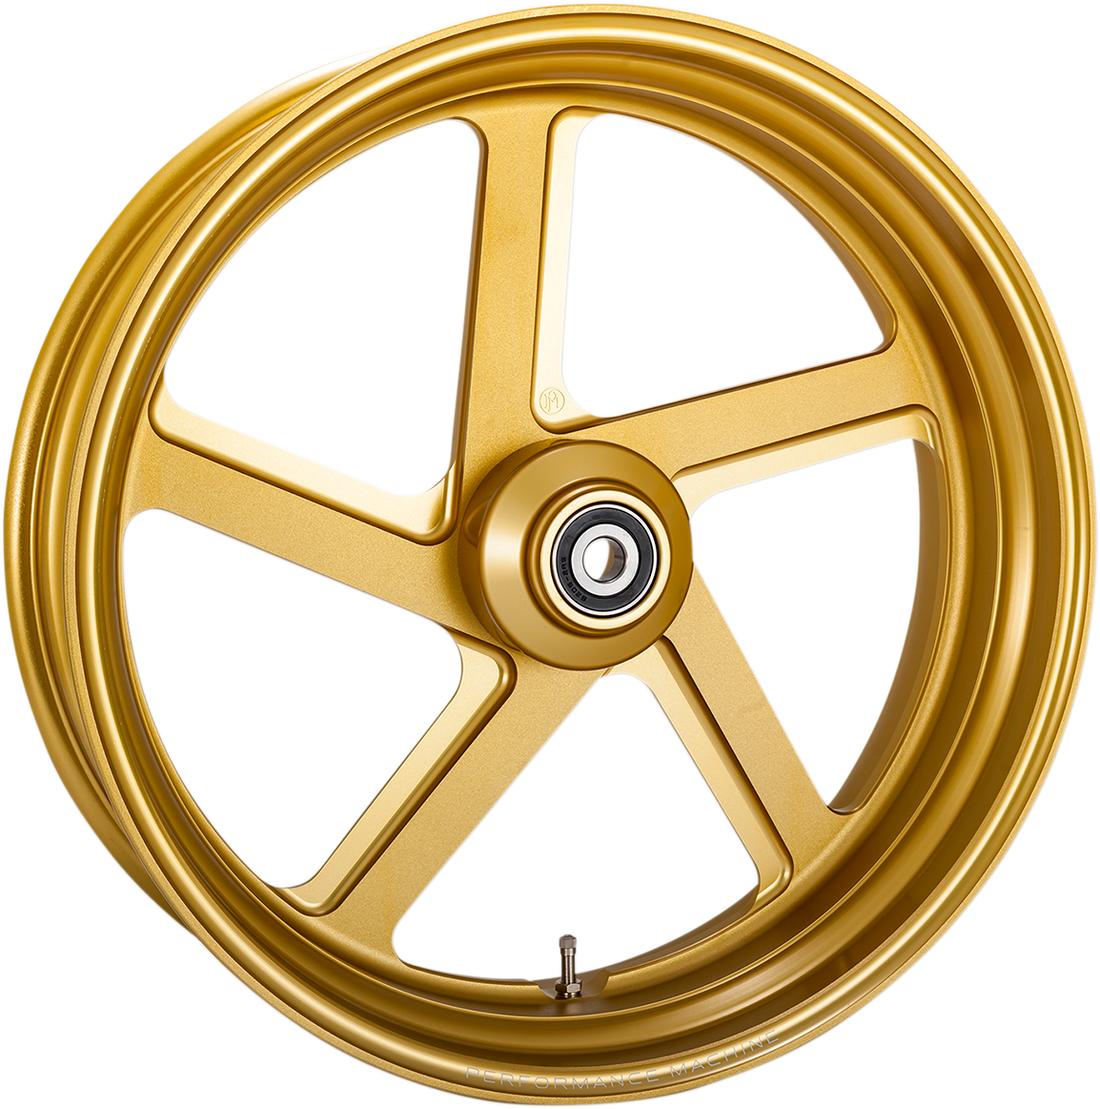 0201-2333 - PERFORMANCE MACHINE (PM) Wheel - Pro-Am - Dual Disc - Front - Gold Ops* - 21"x3.50" - No ABS 12027106RPROSMG